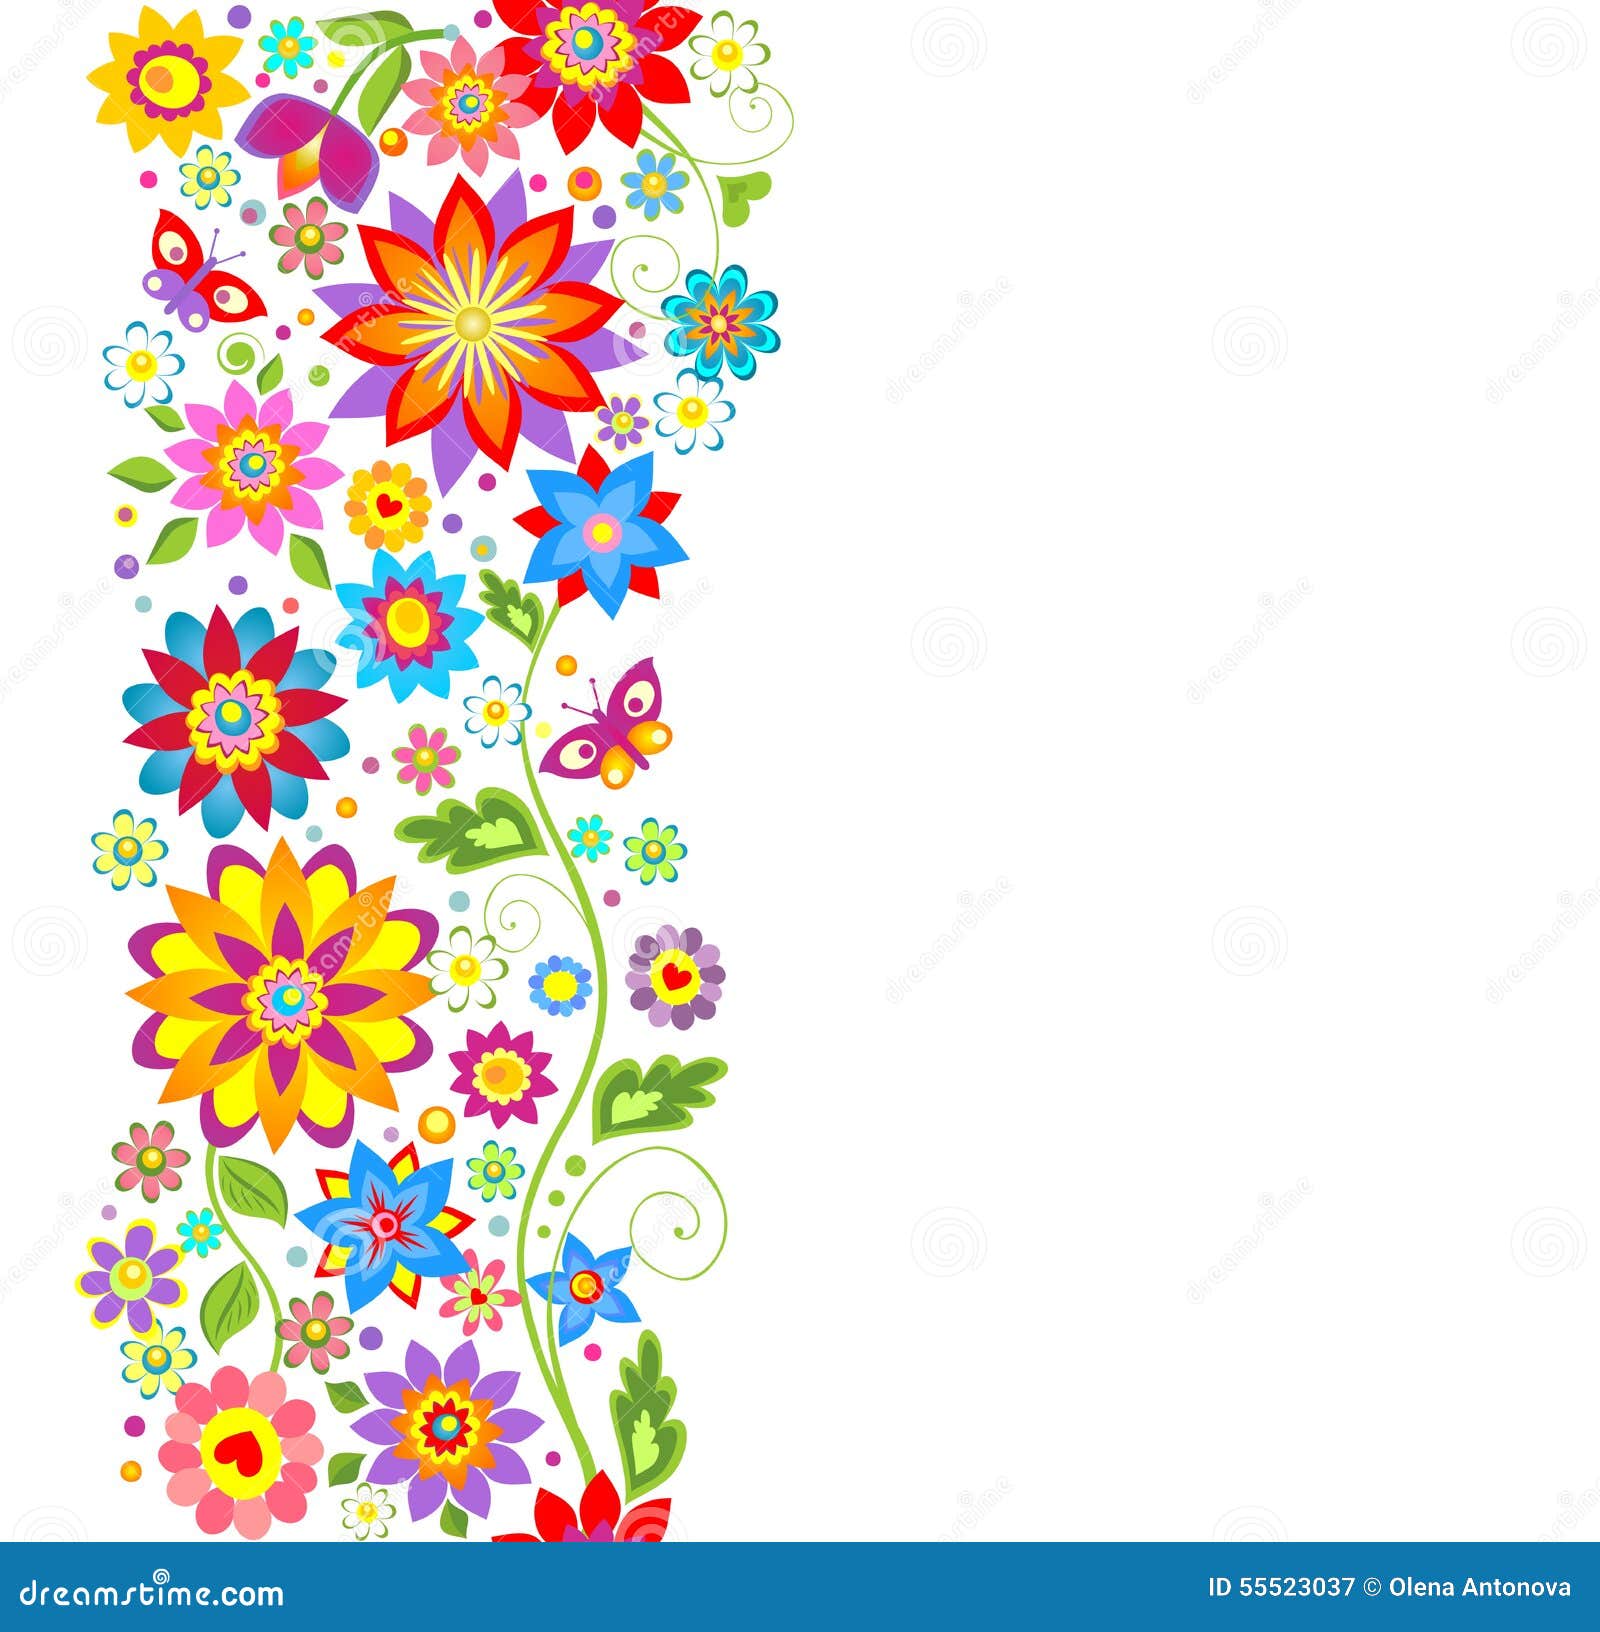 Seamless Abstract Floral Border Stock Vector Illustration Of Nature